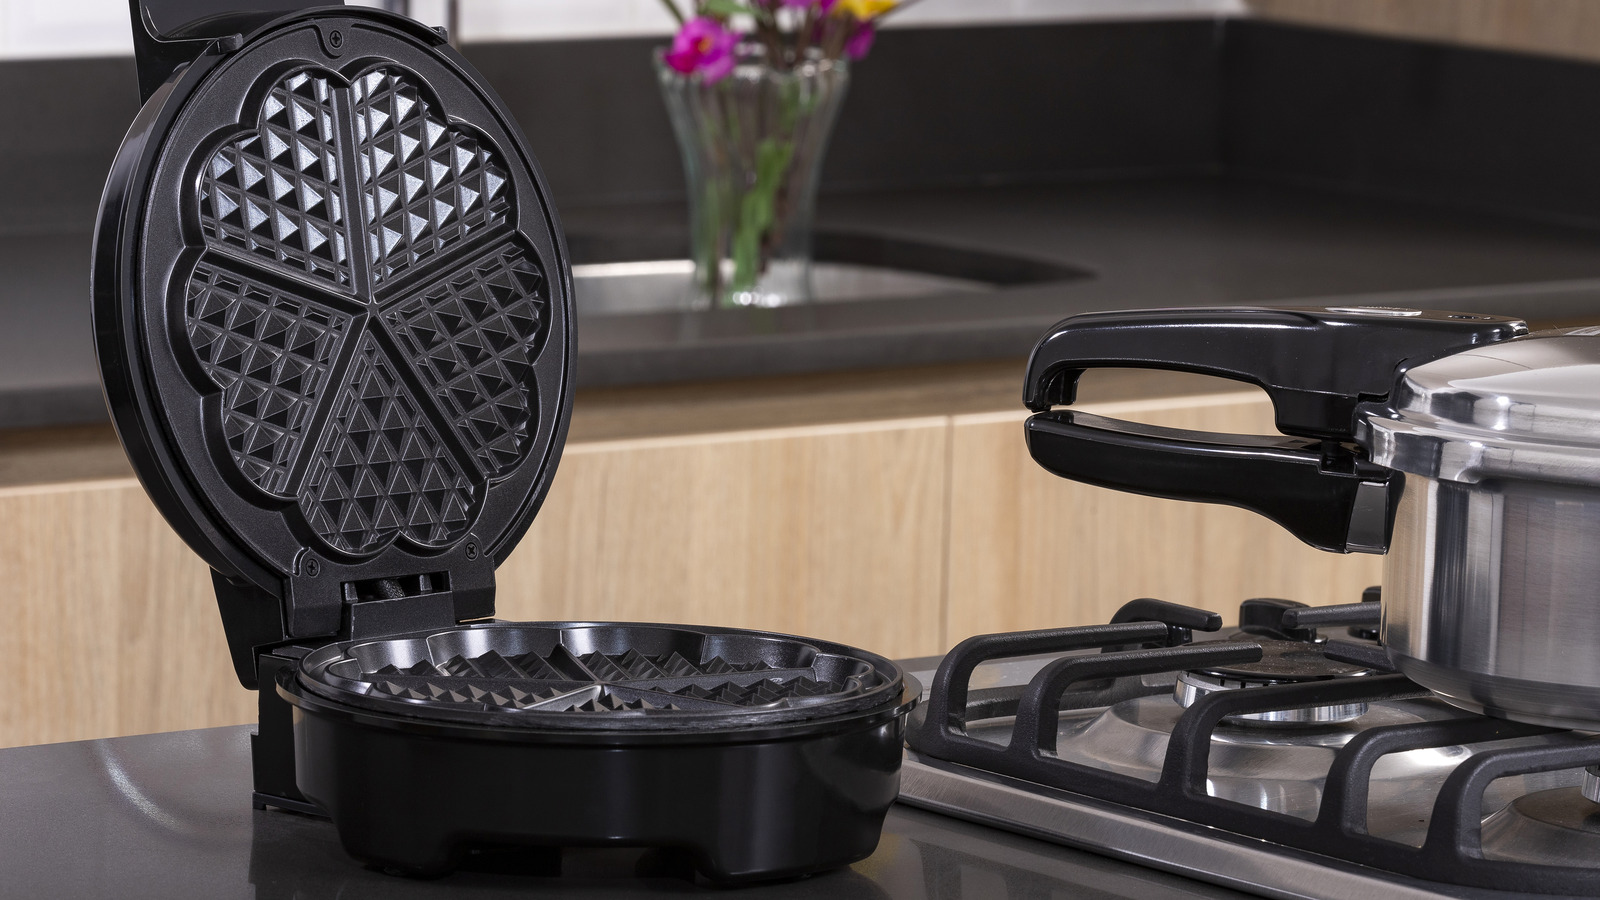 https://www.thedailymeal.com/img/gallery/how-to-clean-a-waffle-maker-and-make-it-look-brand-new/l-intro-1691763490.jpg